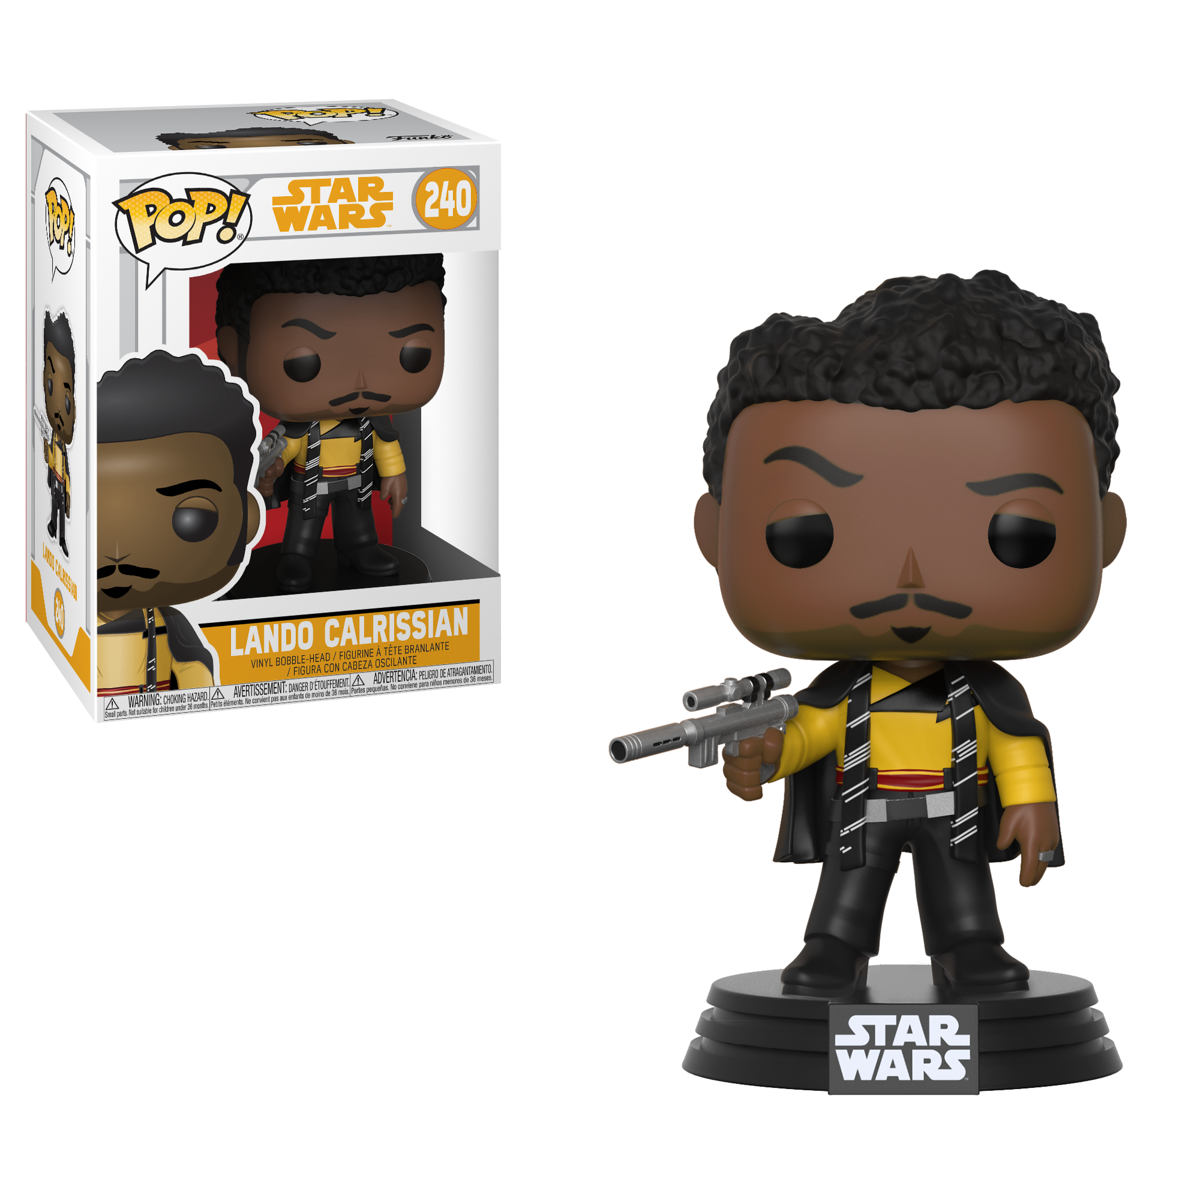 Solo: A Star Wars Story Toys